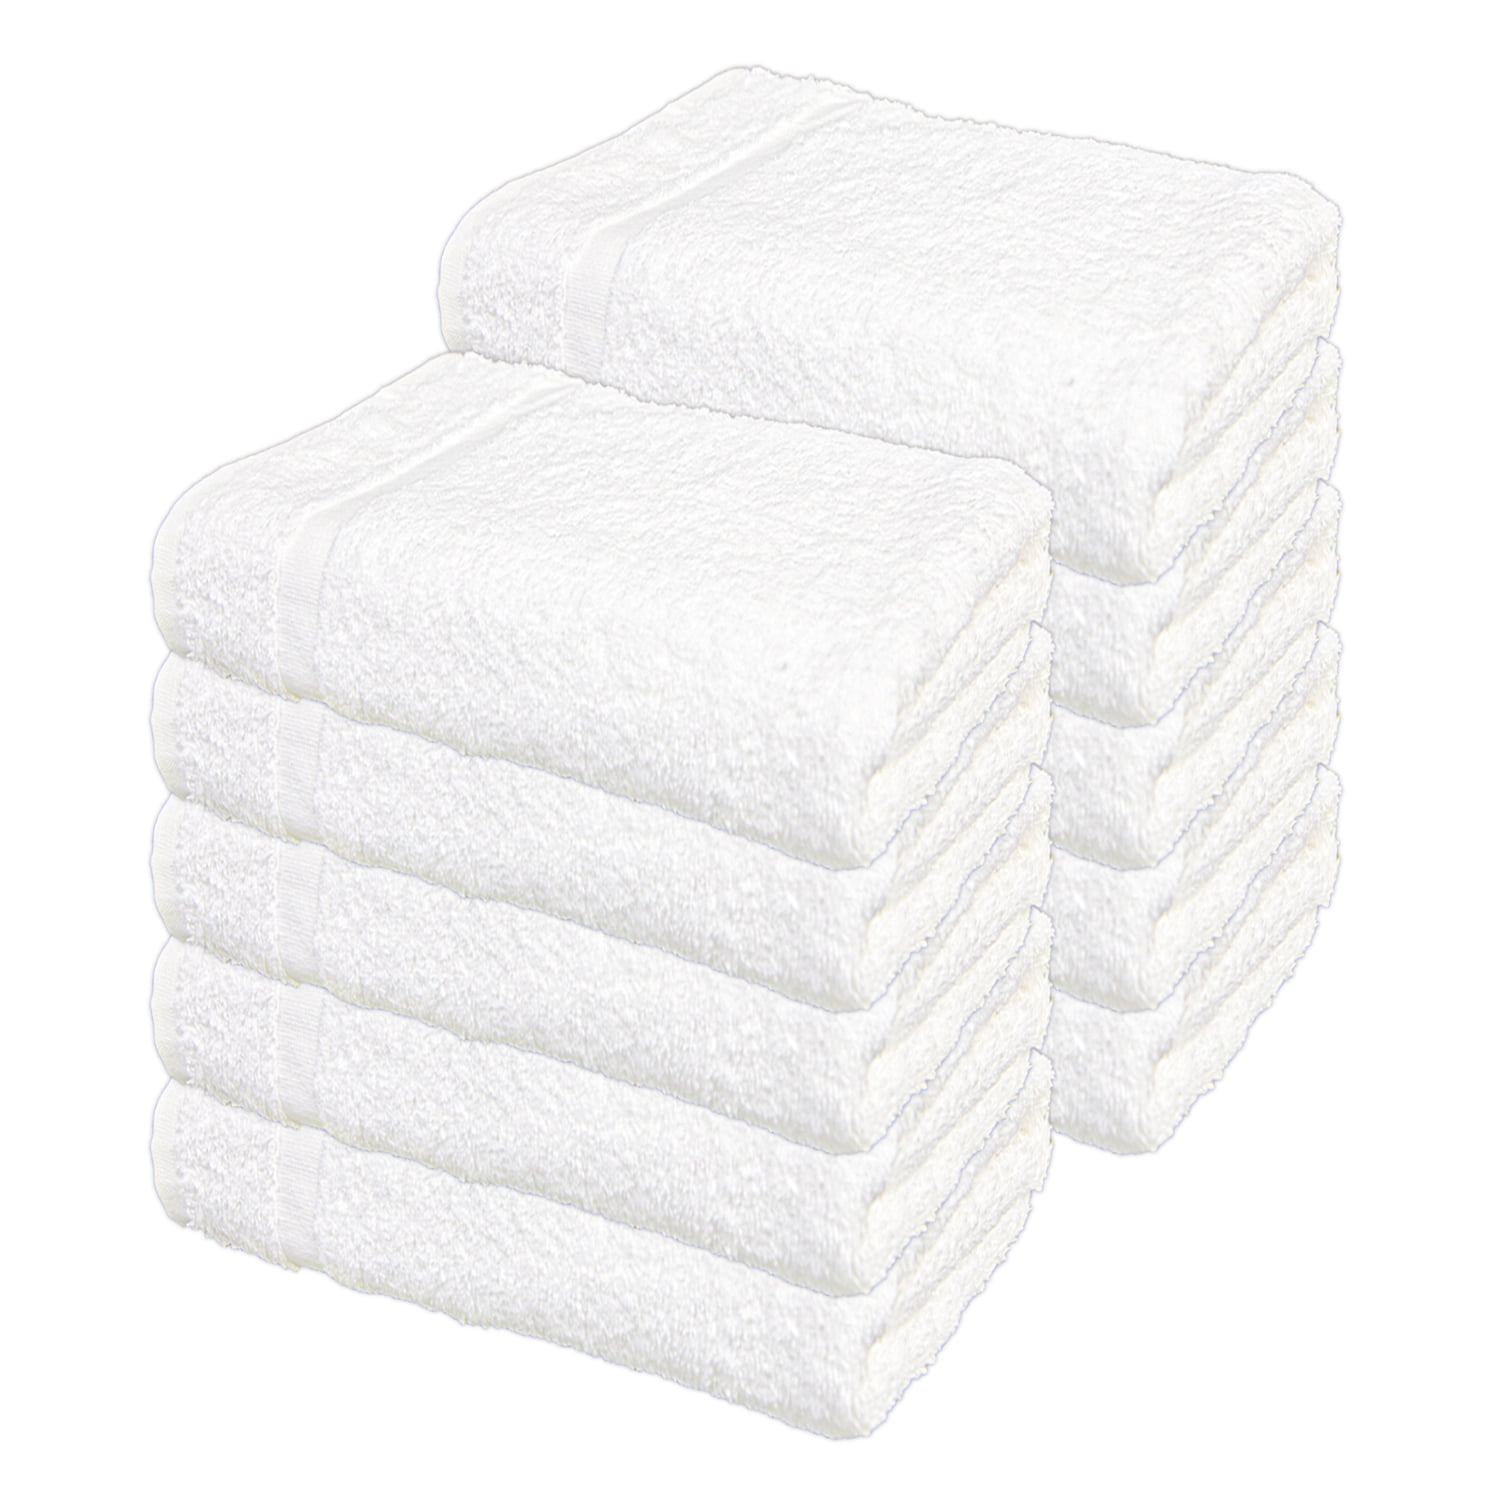 Pearl Linens Cotton Bath Towel Set of 6 for Bathroom, Small Bath Towels 24  X 48 in, Bulk Bath Towels Pack for Home, Hotel, Gym, Salon, Spa, Absorbent